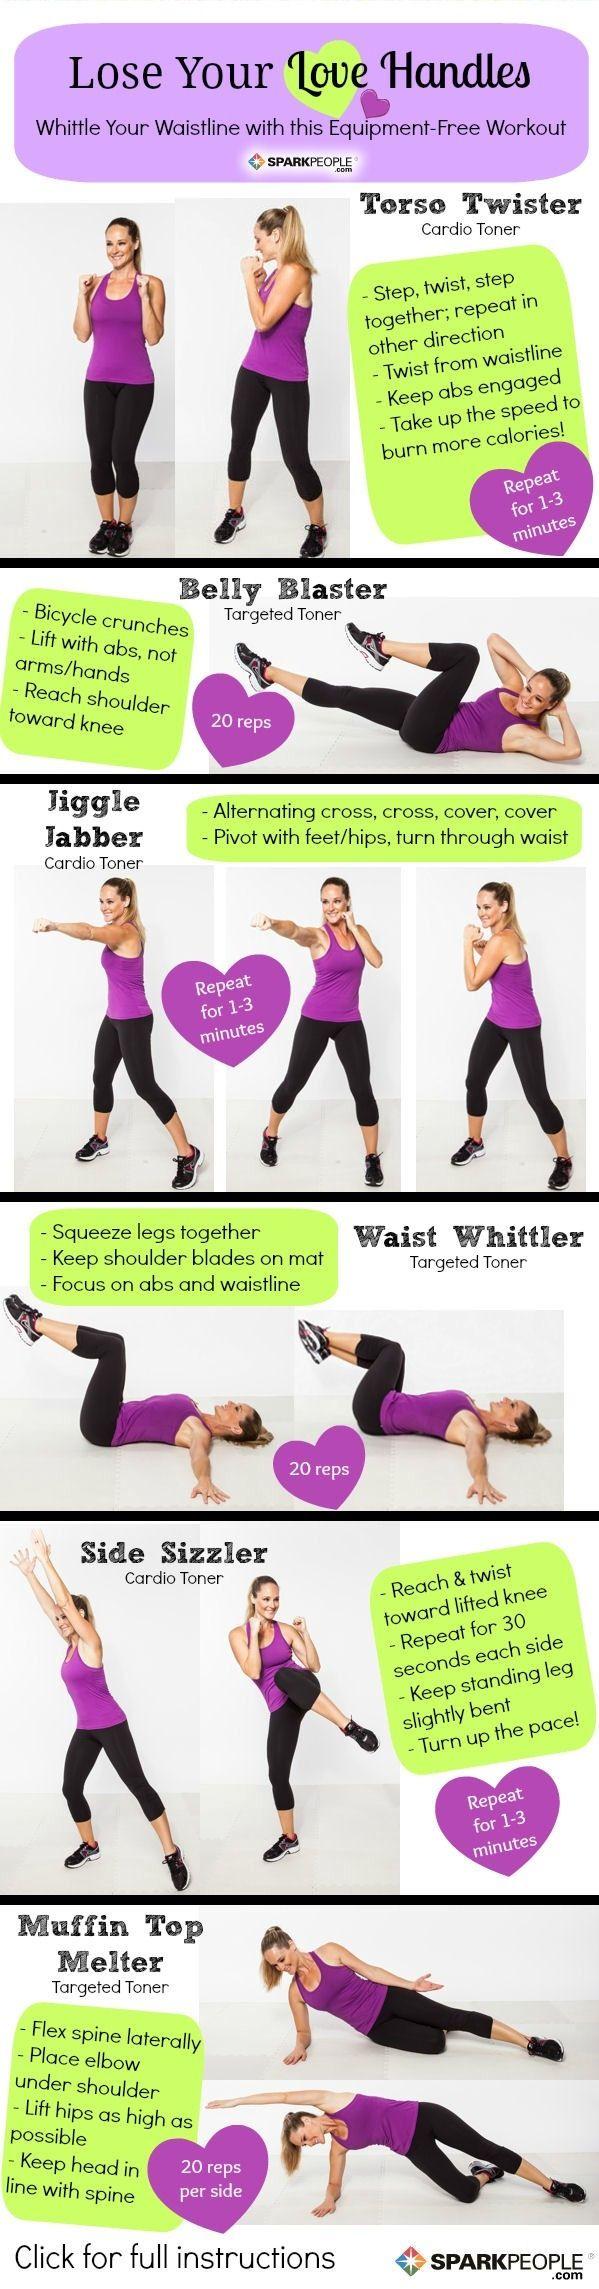 Wedding - The 'Lose Your Love Handles' Workout